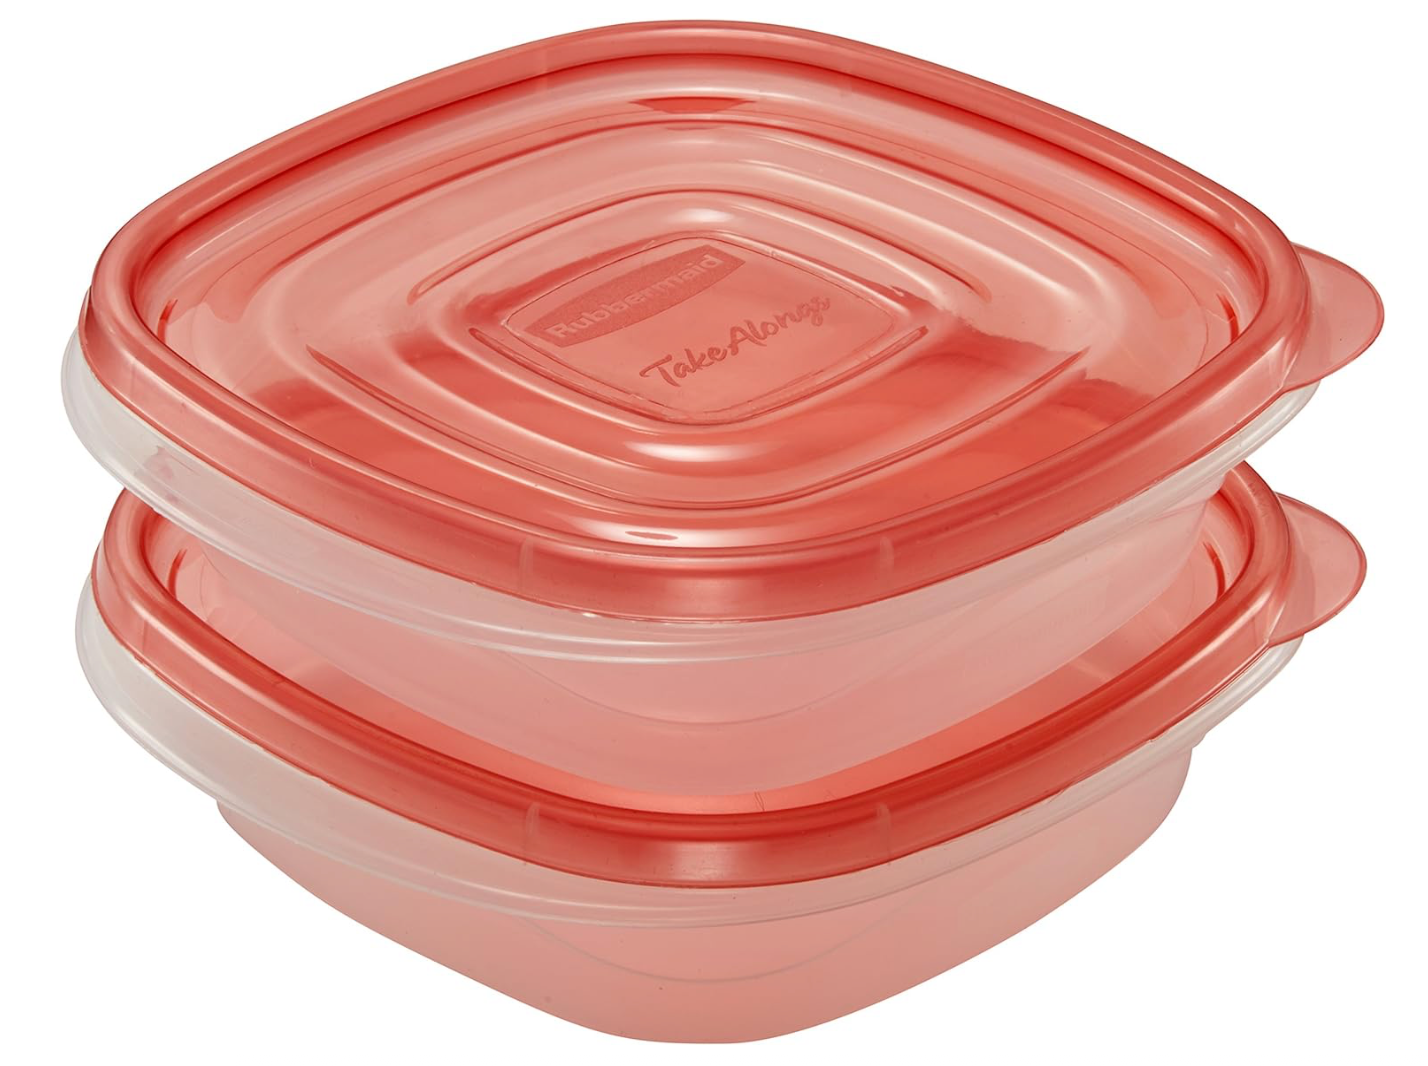 Rubbermaid TakeAlongs Small Bowl Food Storage Containers